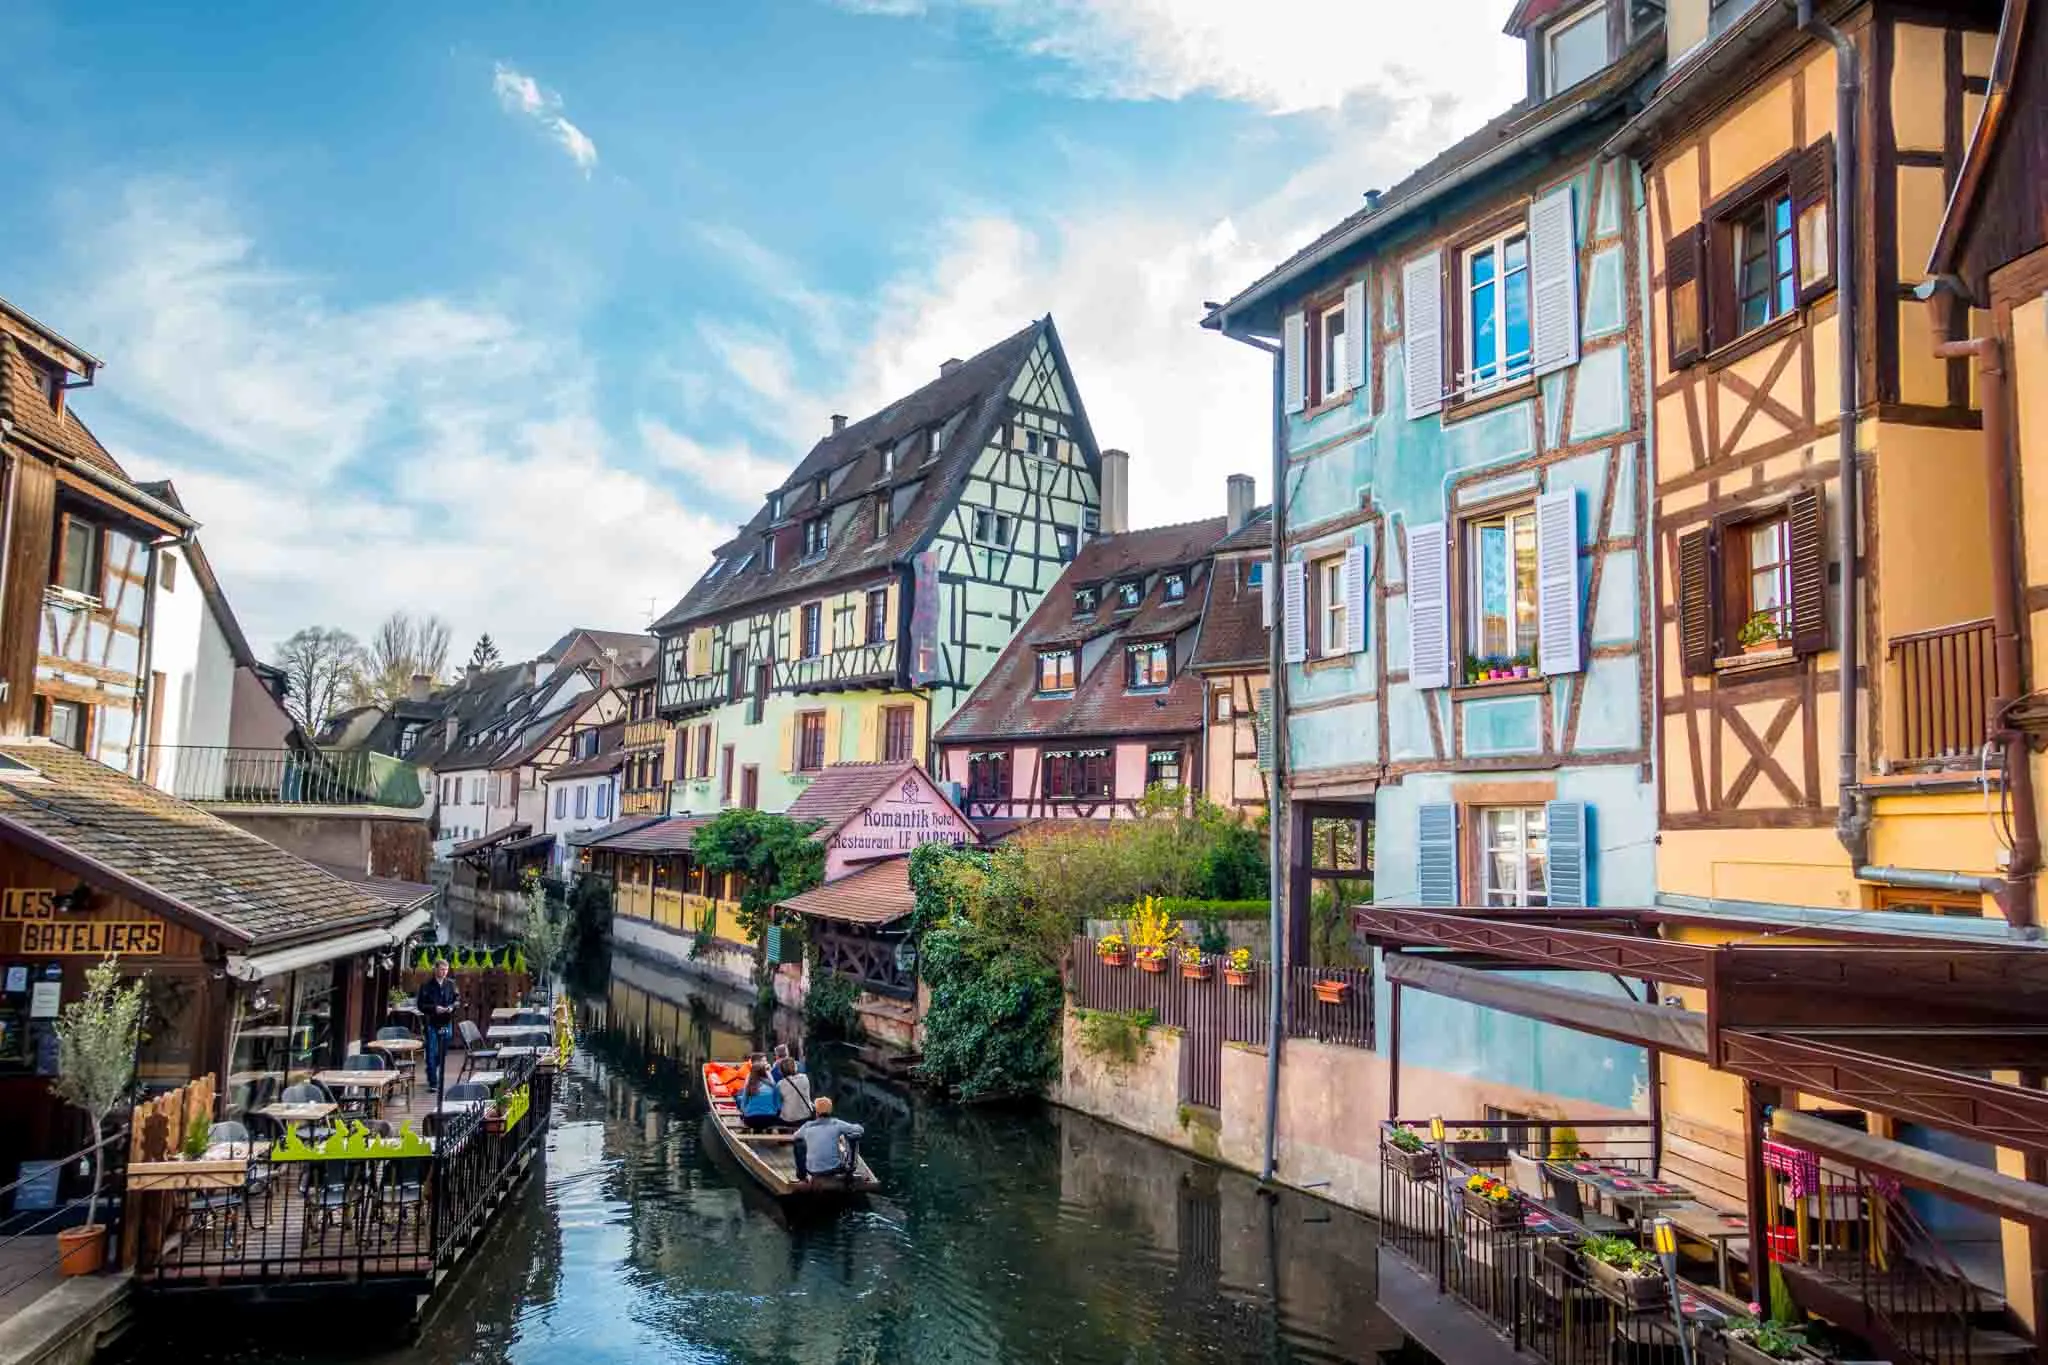 Boat floating by colorful half-timbered buildings.